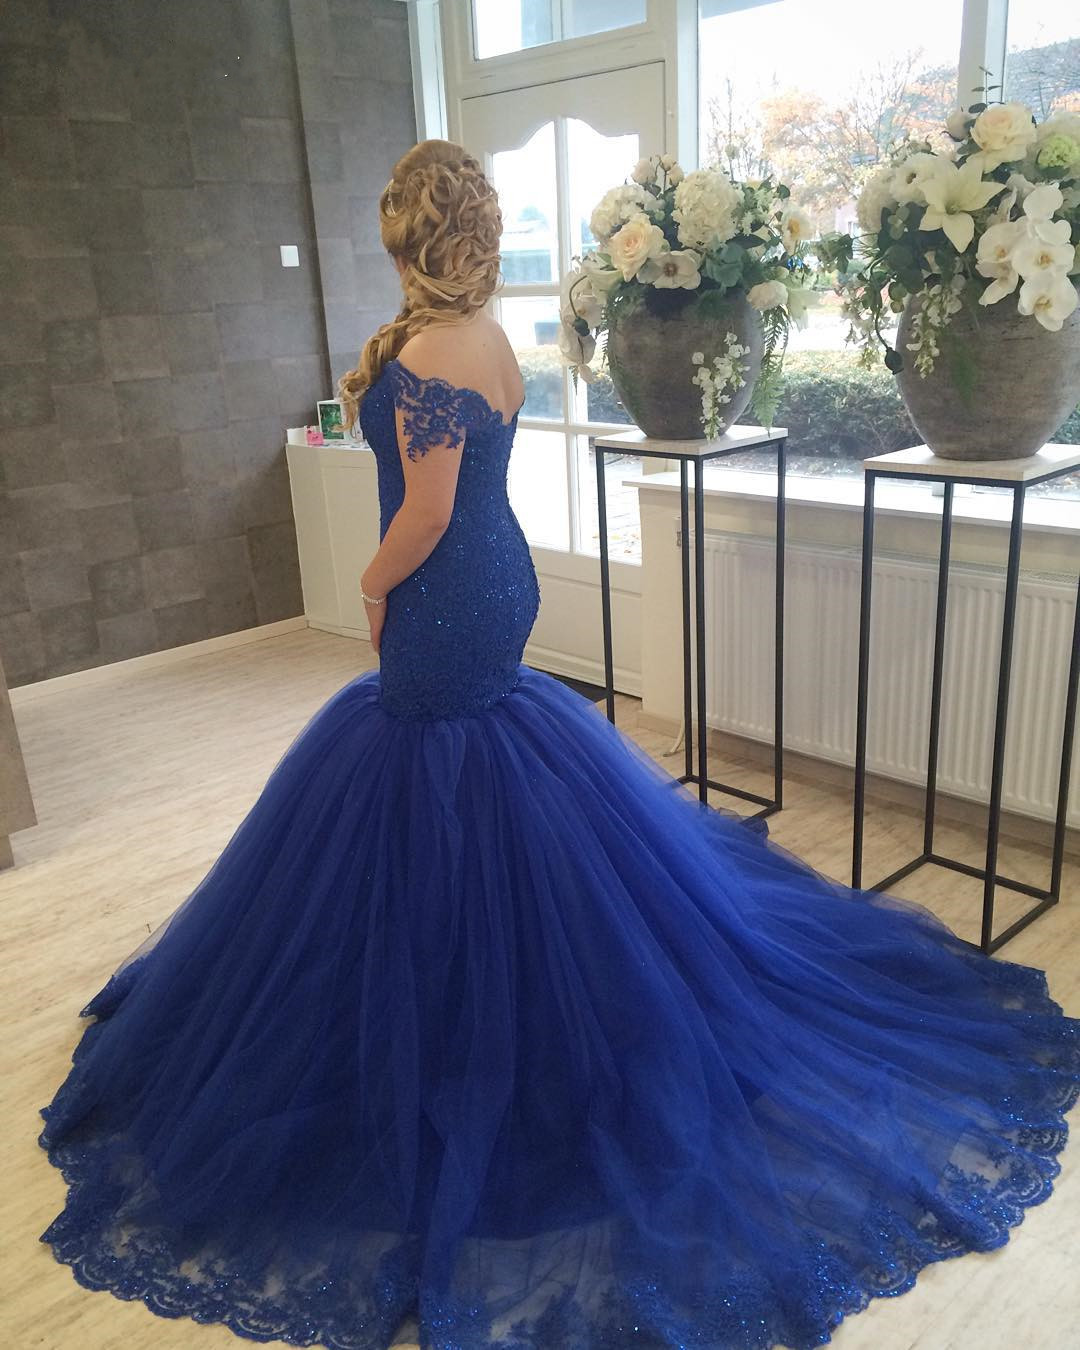 Royal Blue Prom Dresses,lace Prom Dresses,mermaid Evening Dresses,long Formal Gowns,prom Dresses 2017